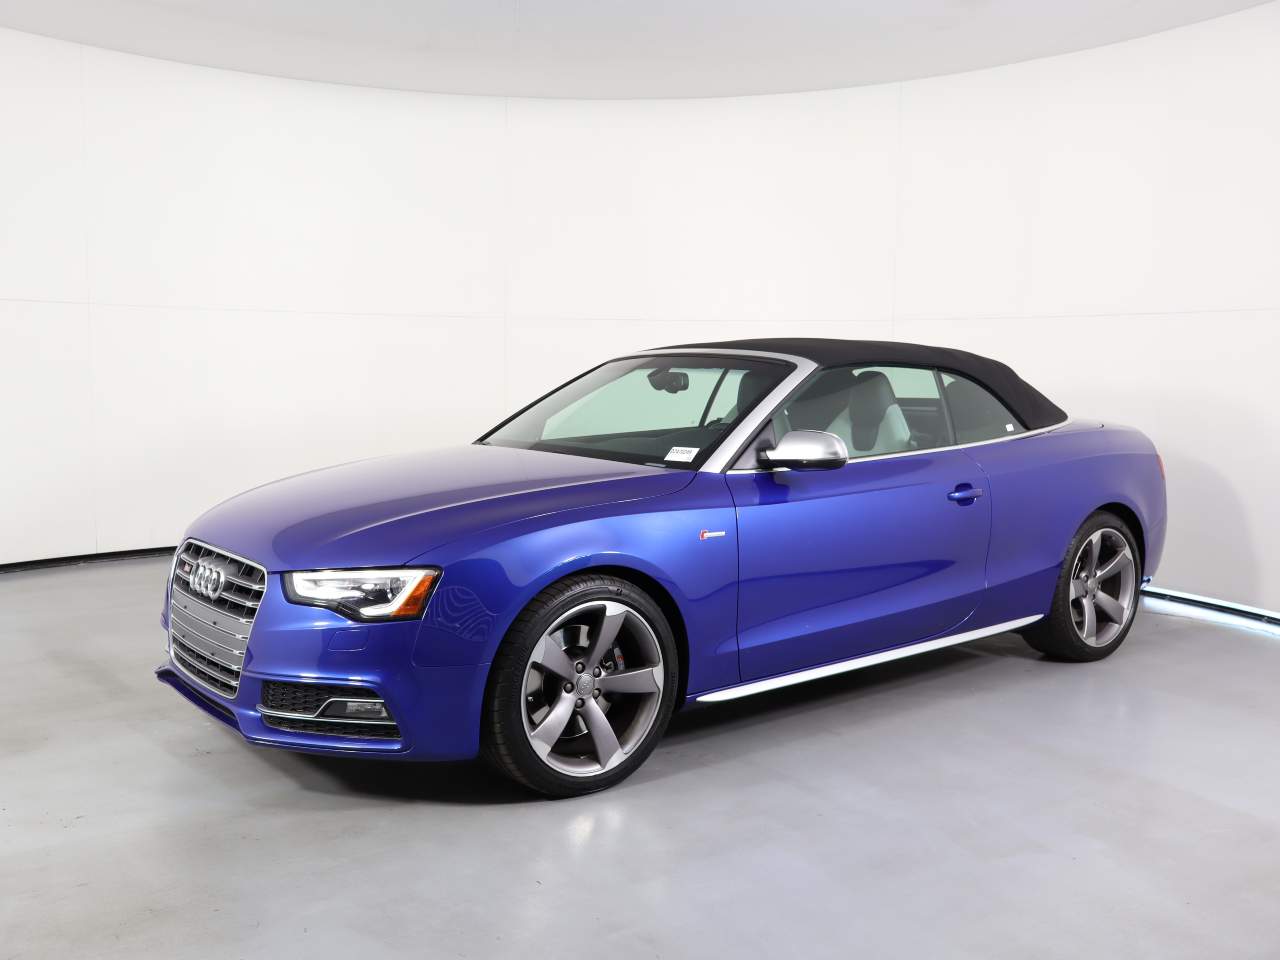 Used 2017 Audi S5 Cabriolet Base with VIN WAUC4AFH4HN002723 for sale in Tucson, AZ